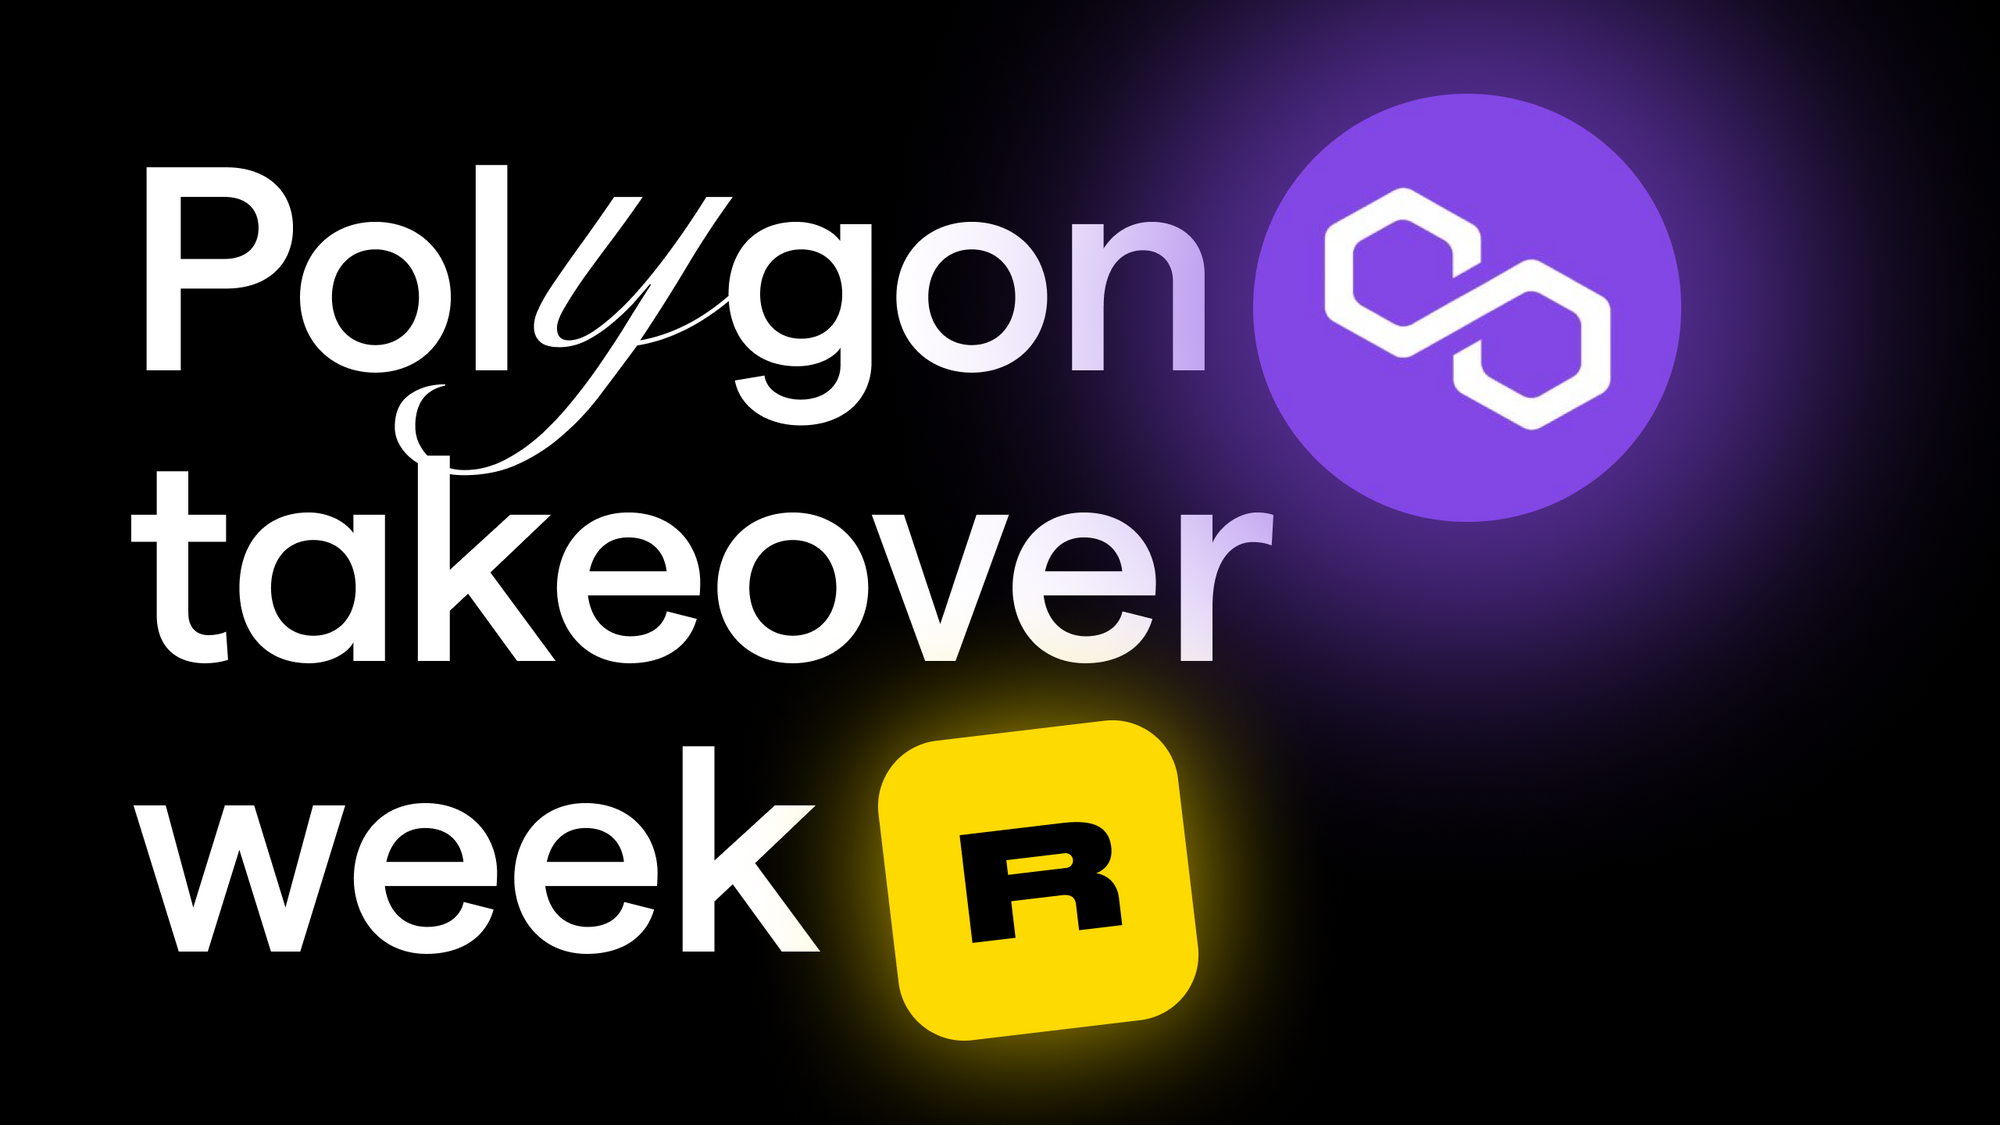 Celebrating Polygon Week: Trade These 4 NFT Gaming Projects With 0% Fee